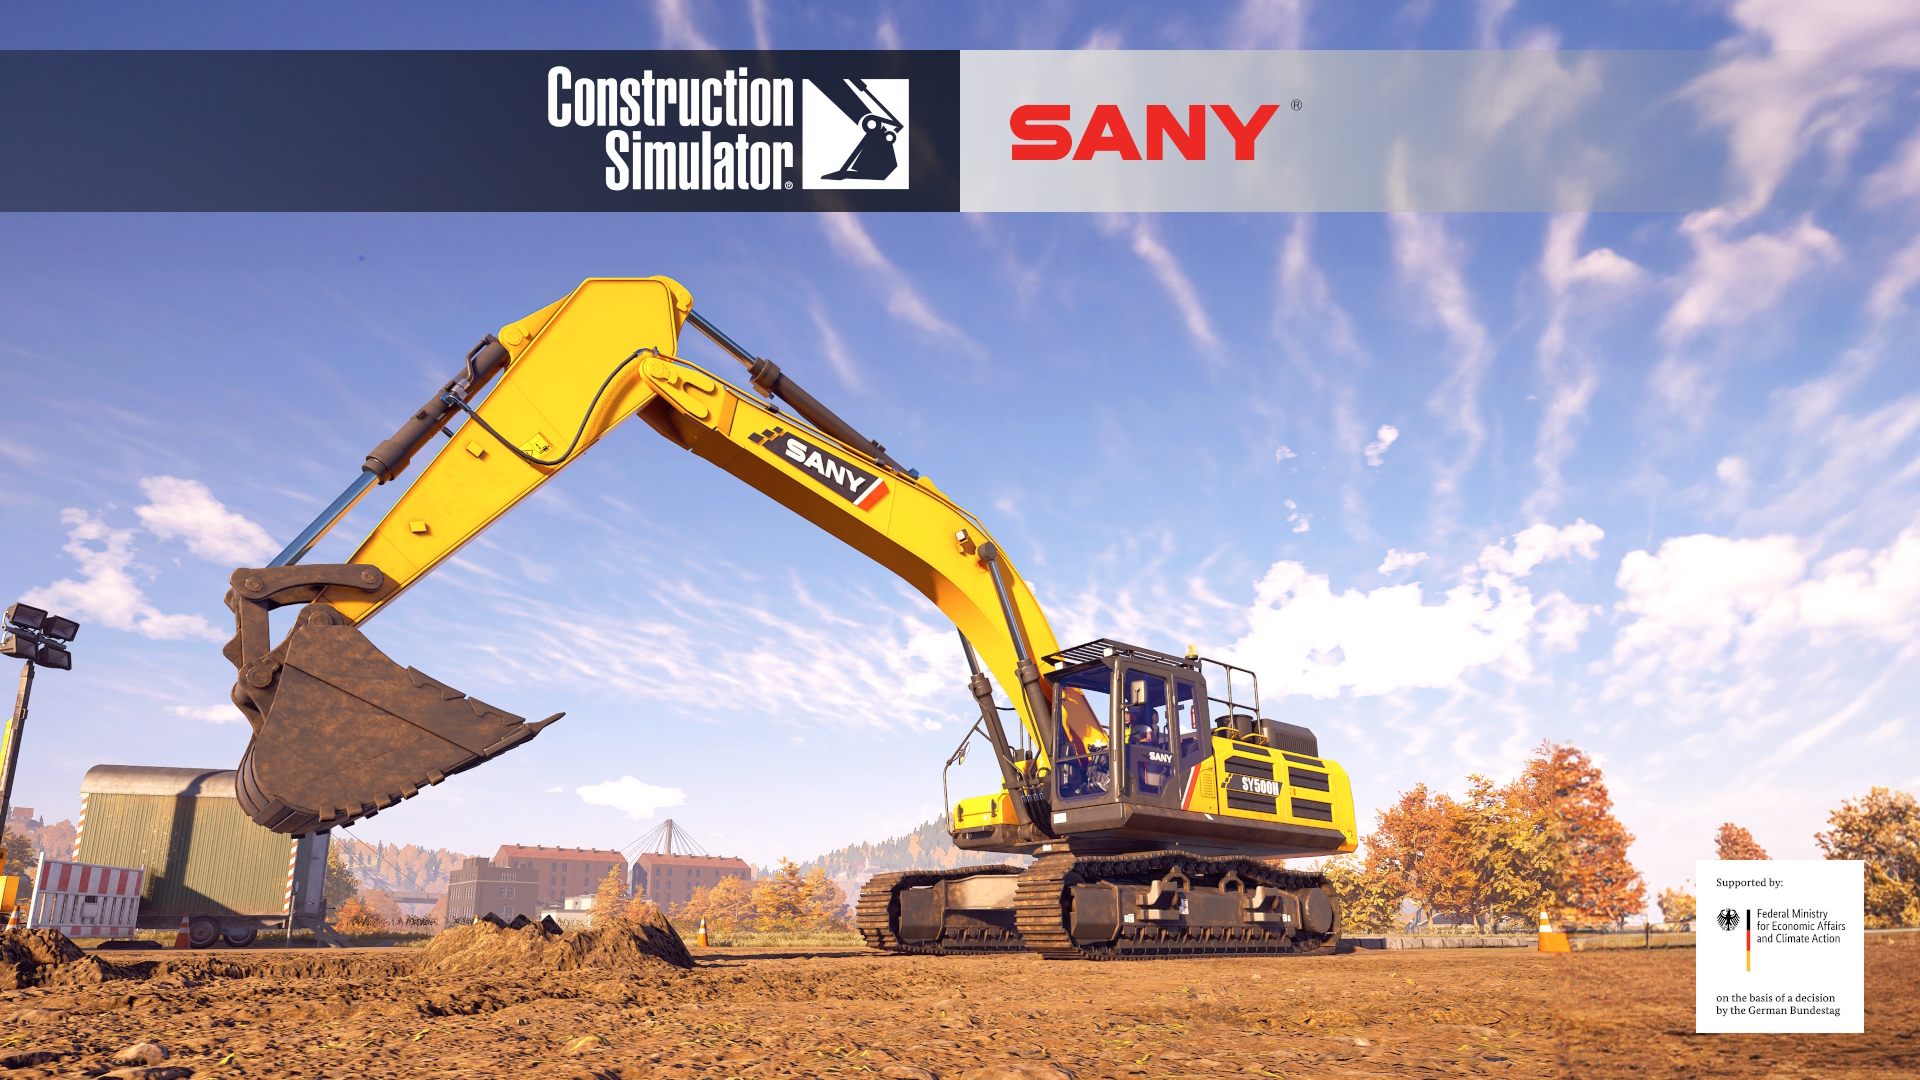 new 15 construction machines now available! SANY Construction with Simulator® - Pack